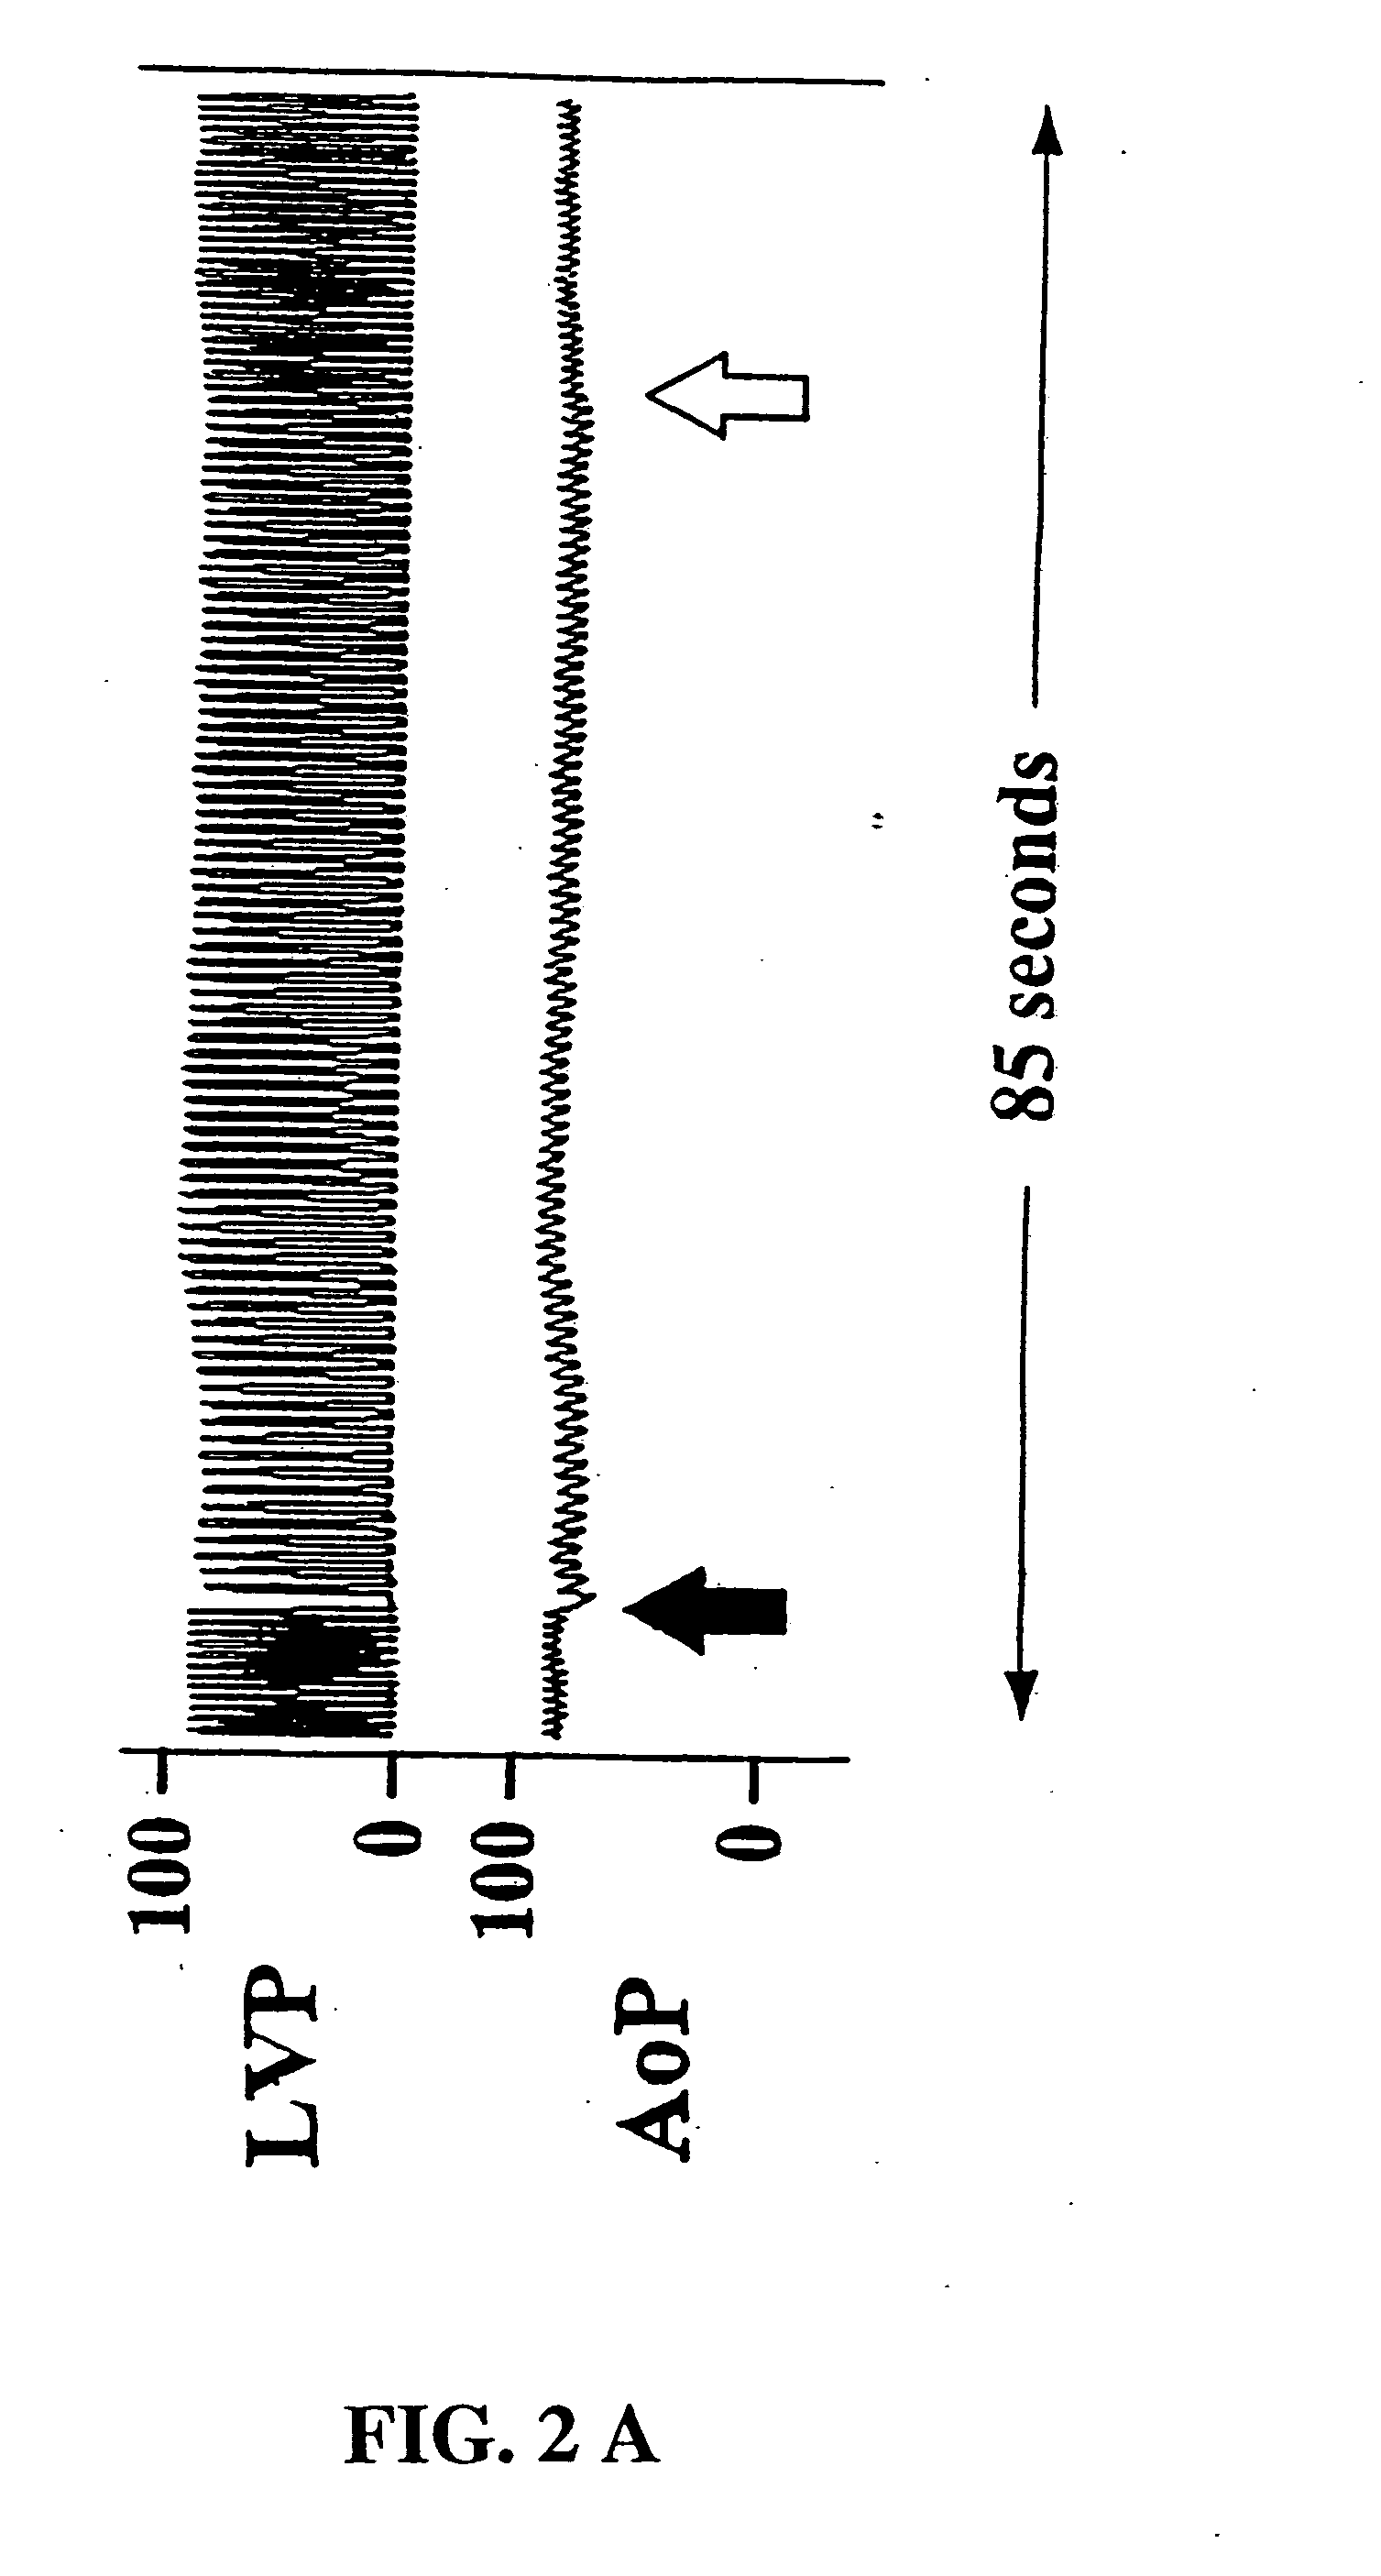 Methods of indirectly stimulating the vagus nerve with an electrical field